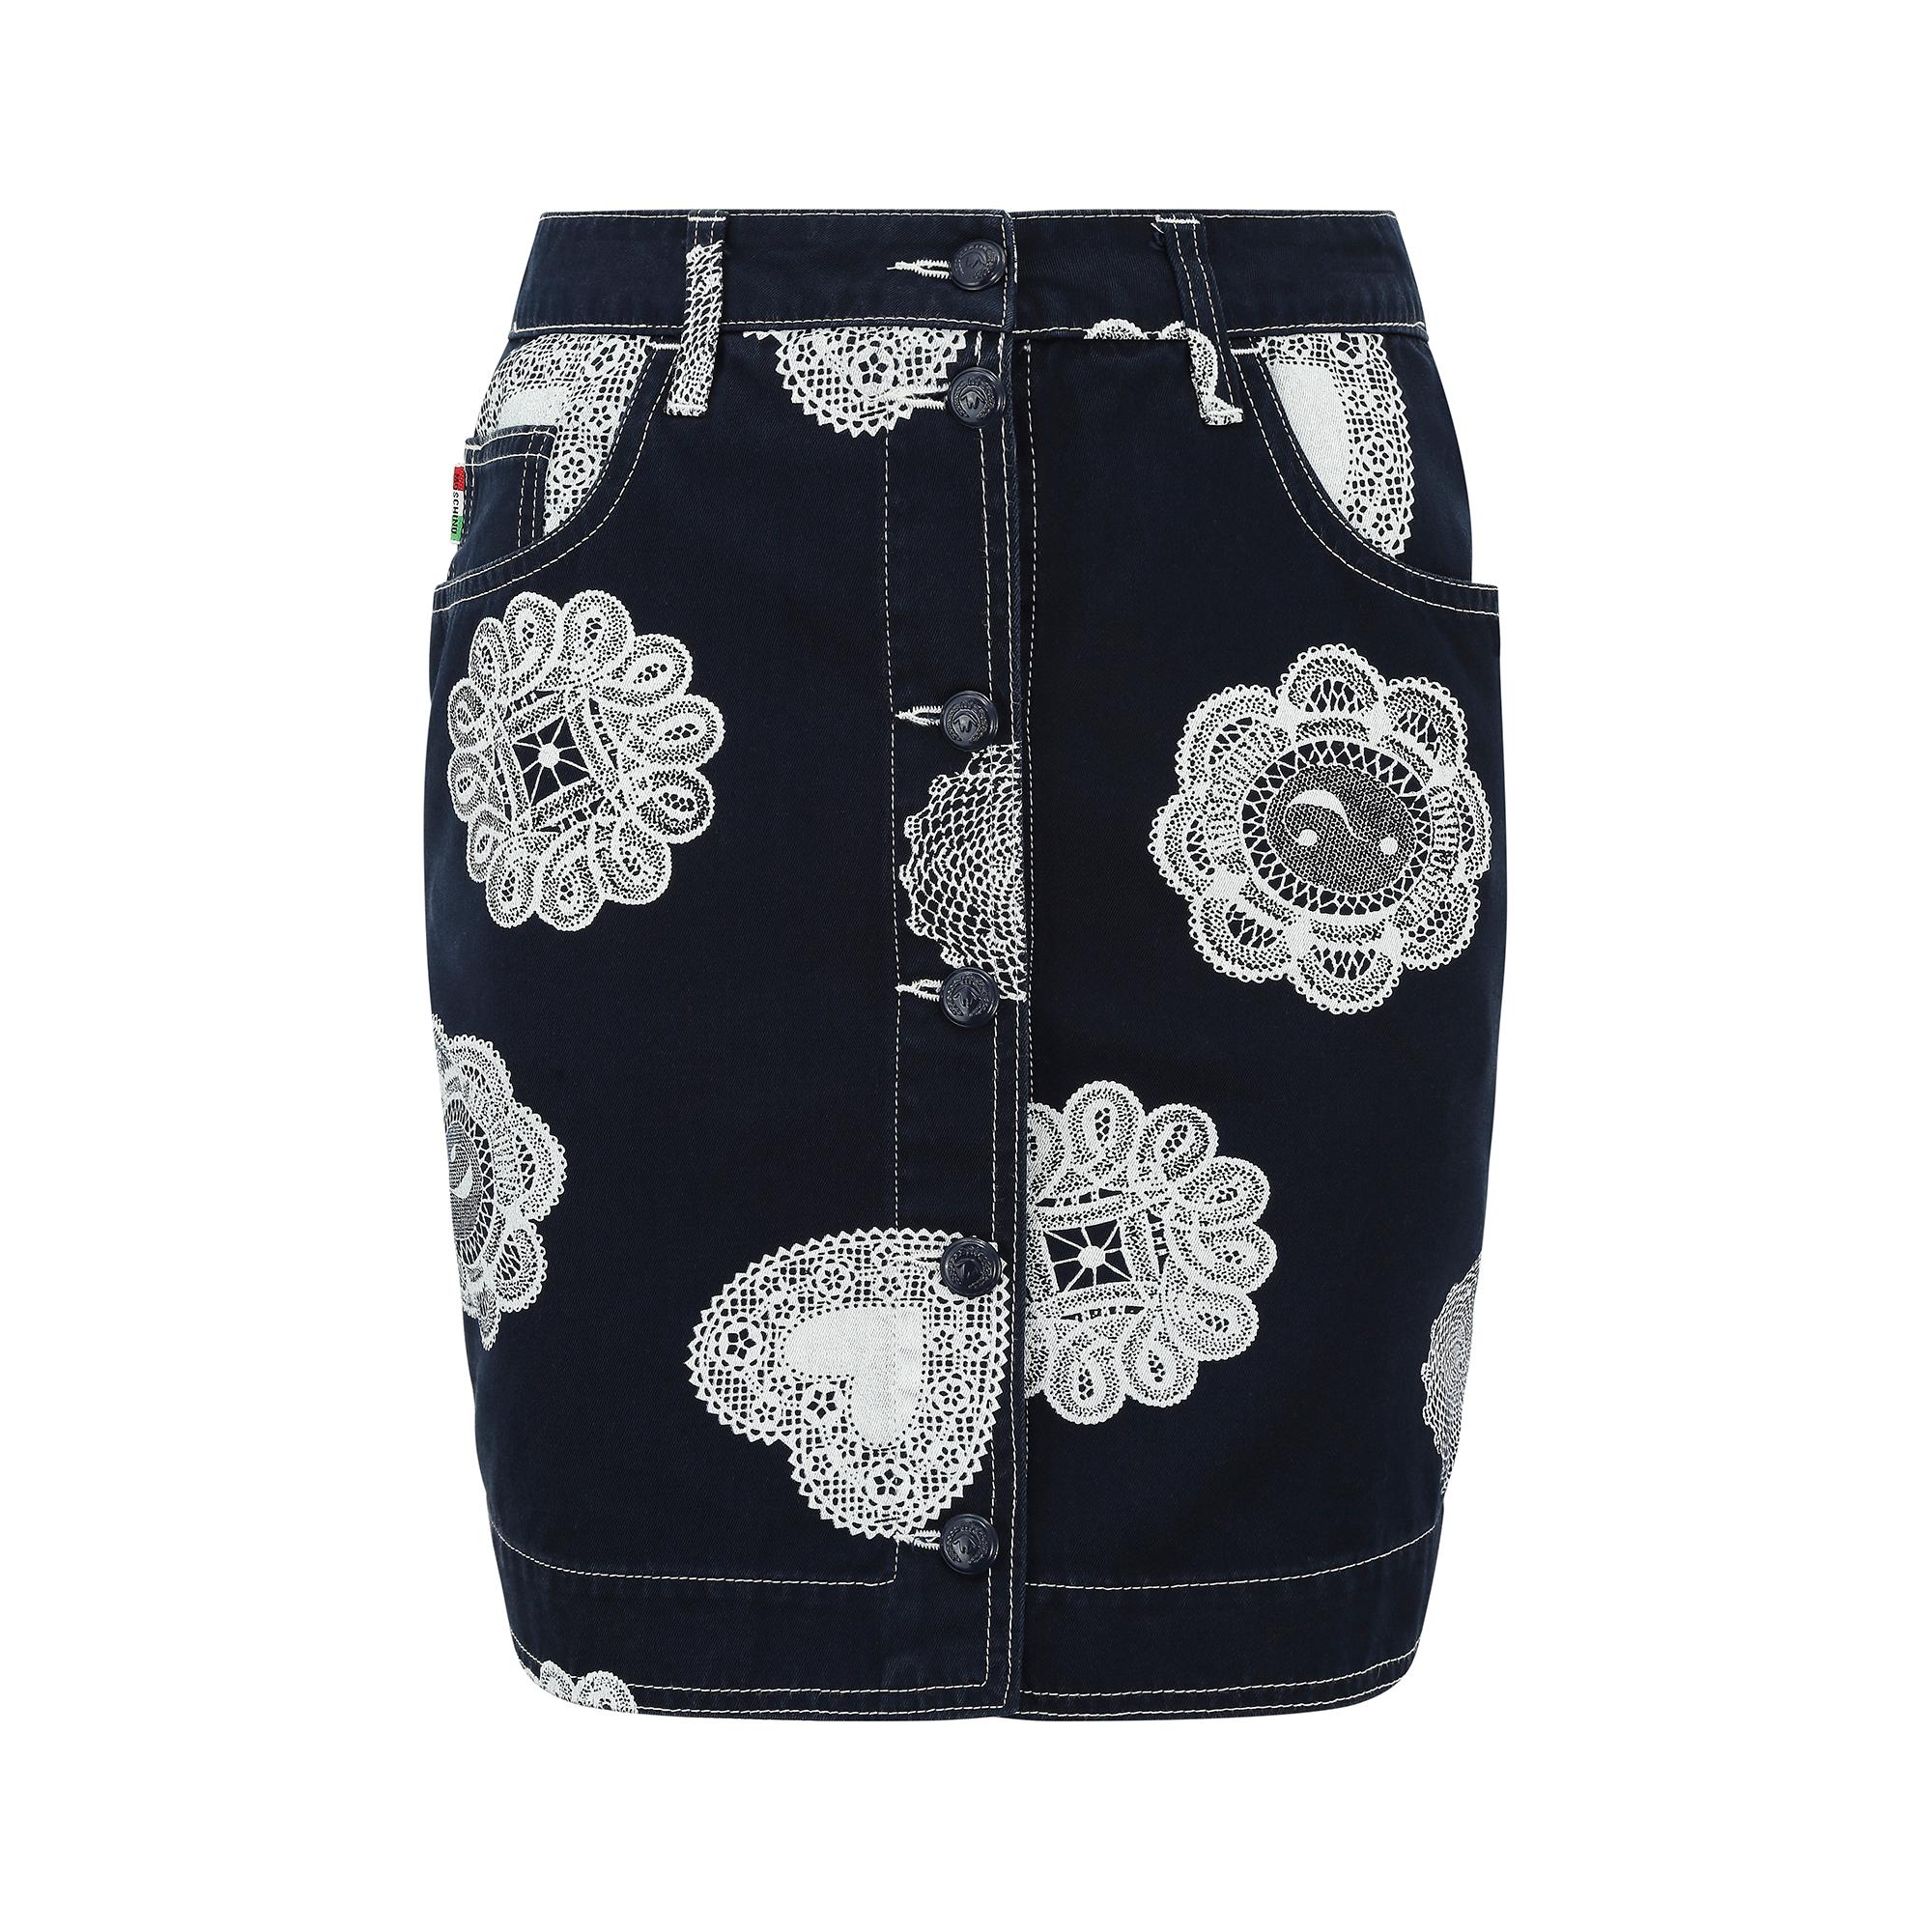 This early 1990s Moschino Jeans novelty denim mini skirt is constructed from a medium to light weight deep indigo wash denim, with a super fun, white doily print.  It has some whimsical  brand markings embedded in the design such as the ? mark and a